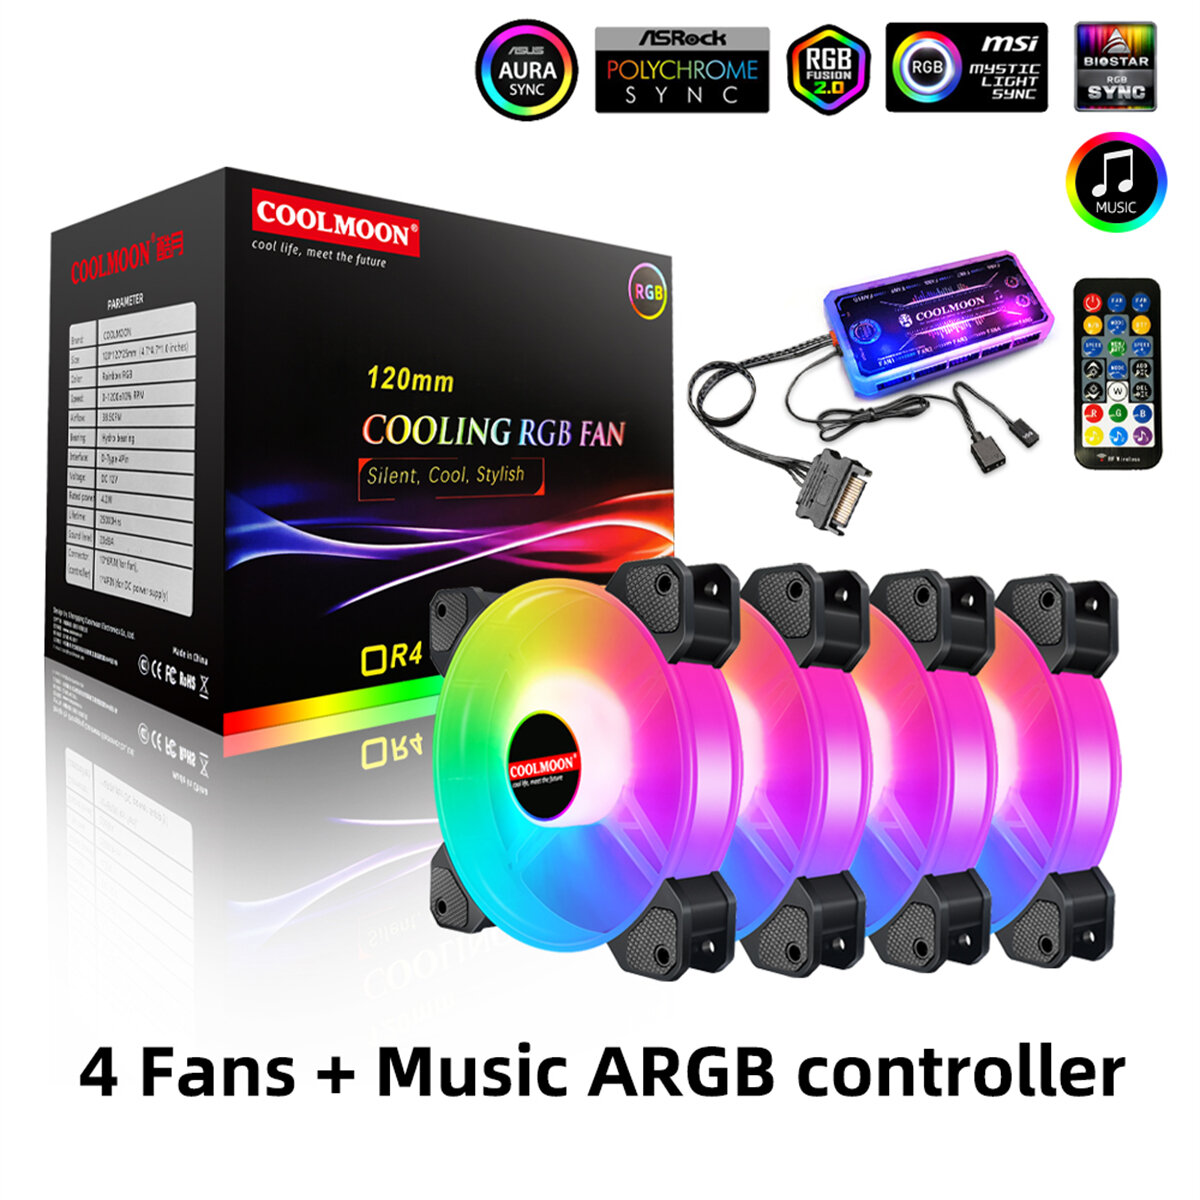 best price,coolmoon,120mm,cooling,fan,rgb,6pin,music,argb,controller,discount